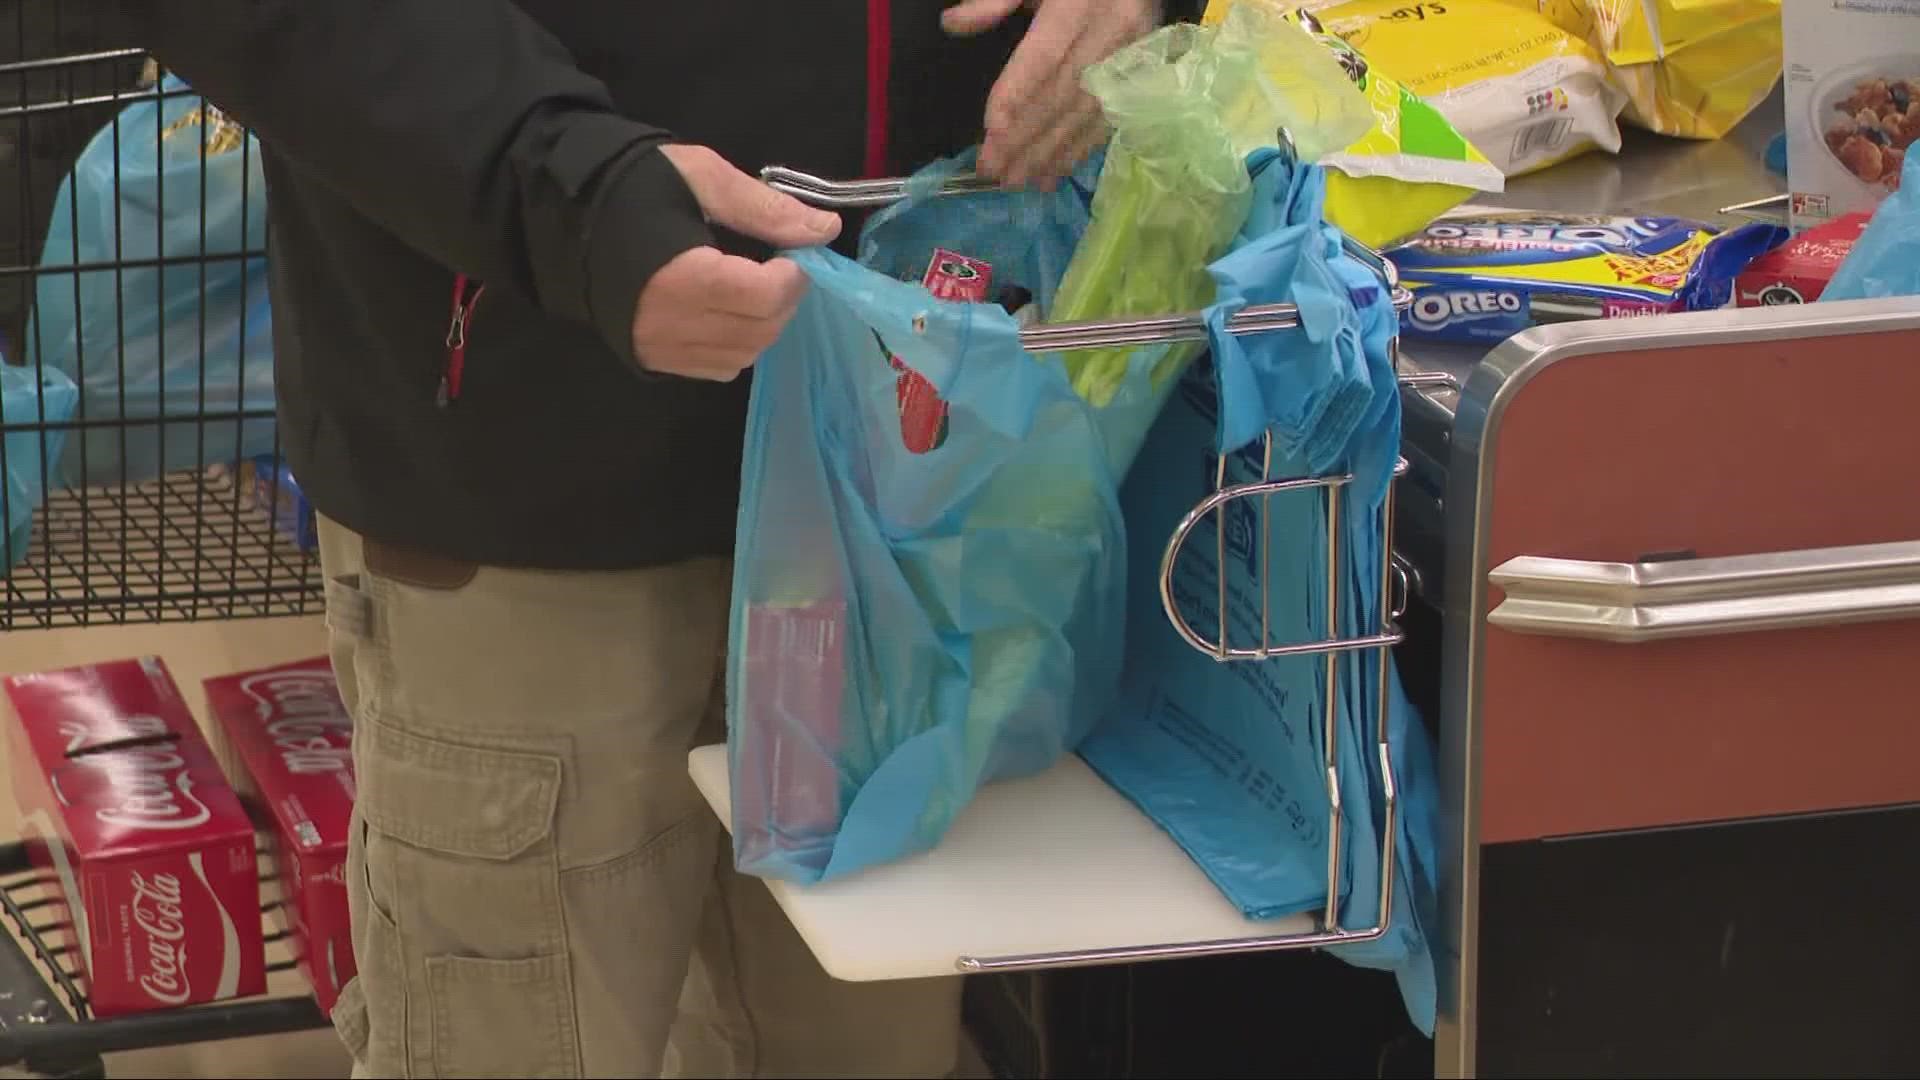 A big policy change has taken effect at all Giant Eagle stores in Cuyahoga County as the company eliminates single-use plastic bags.